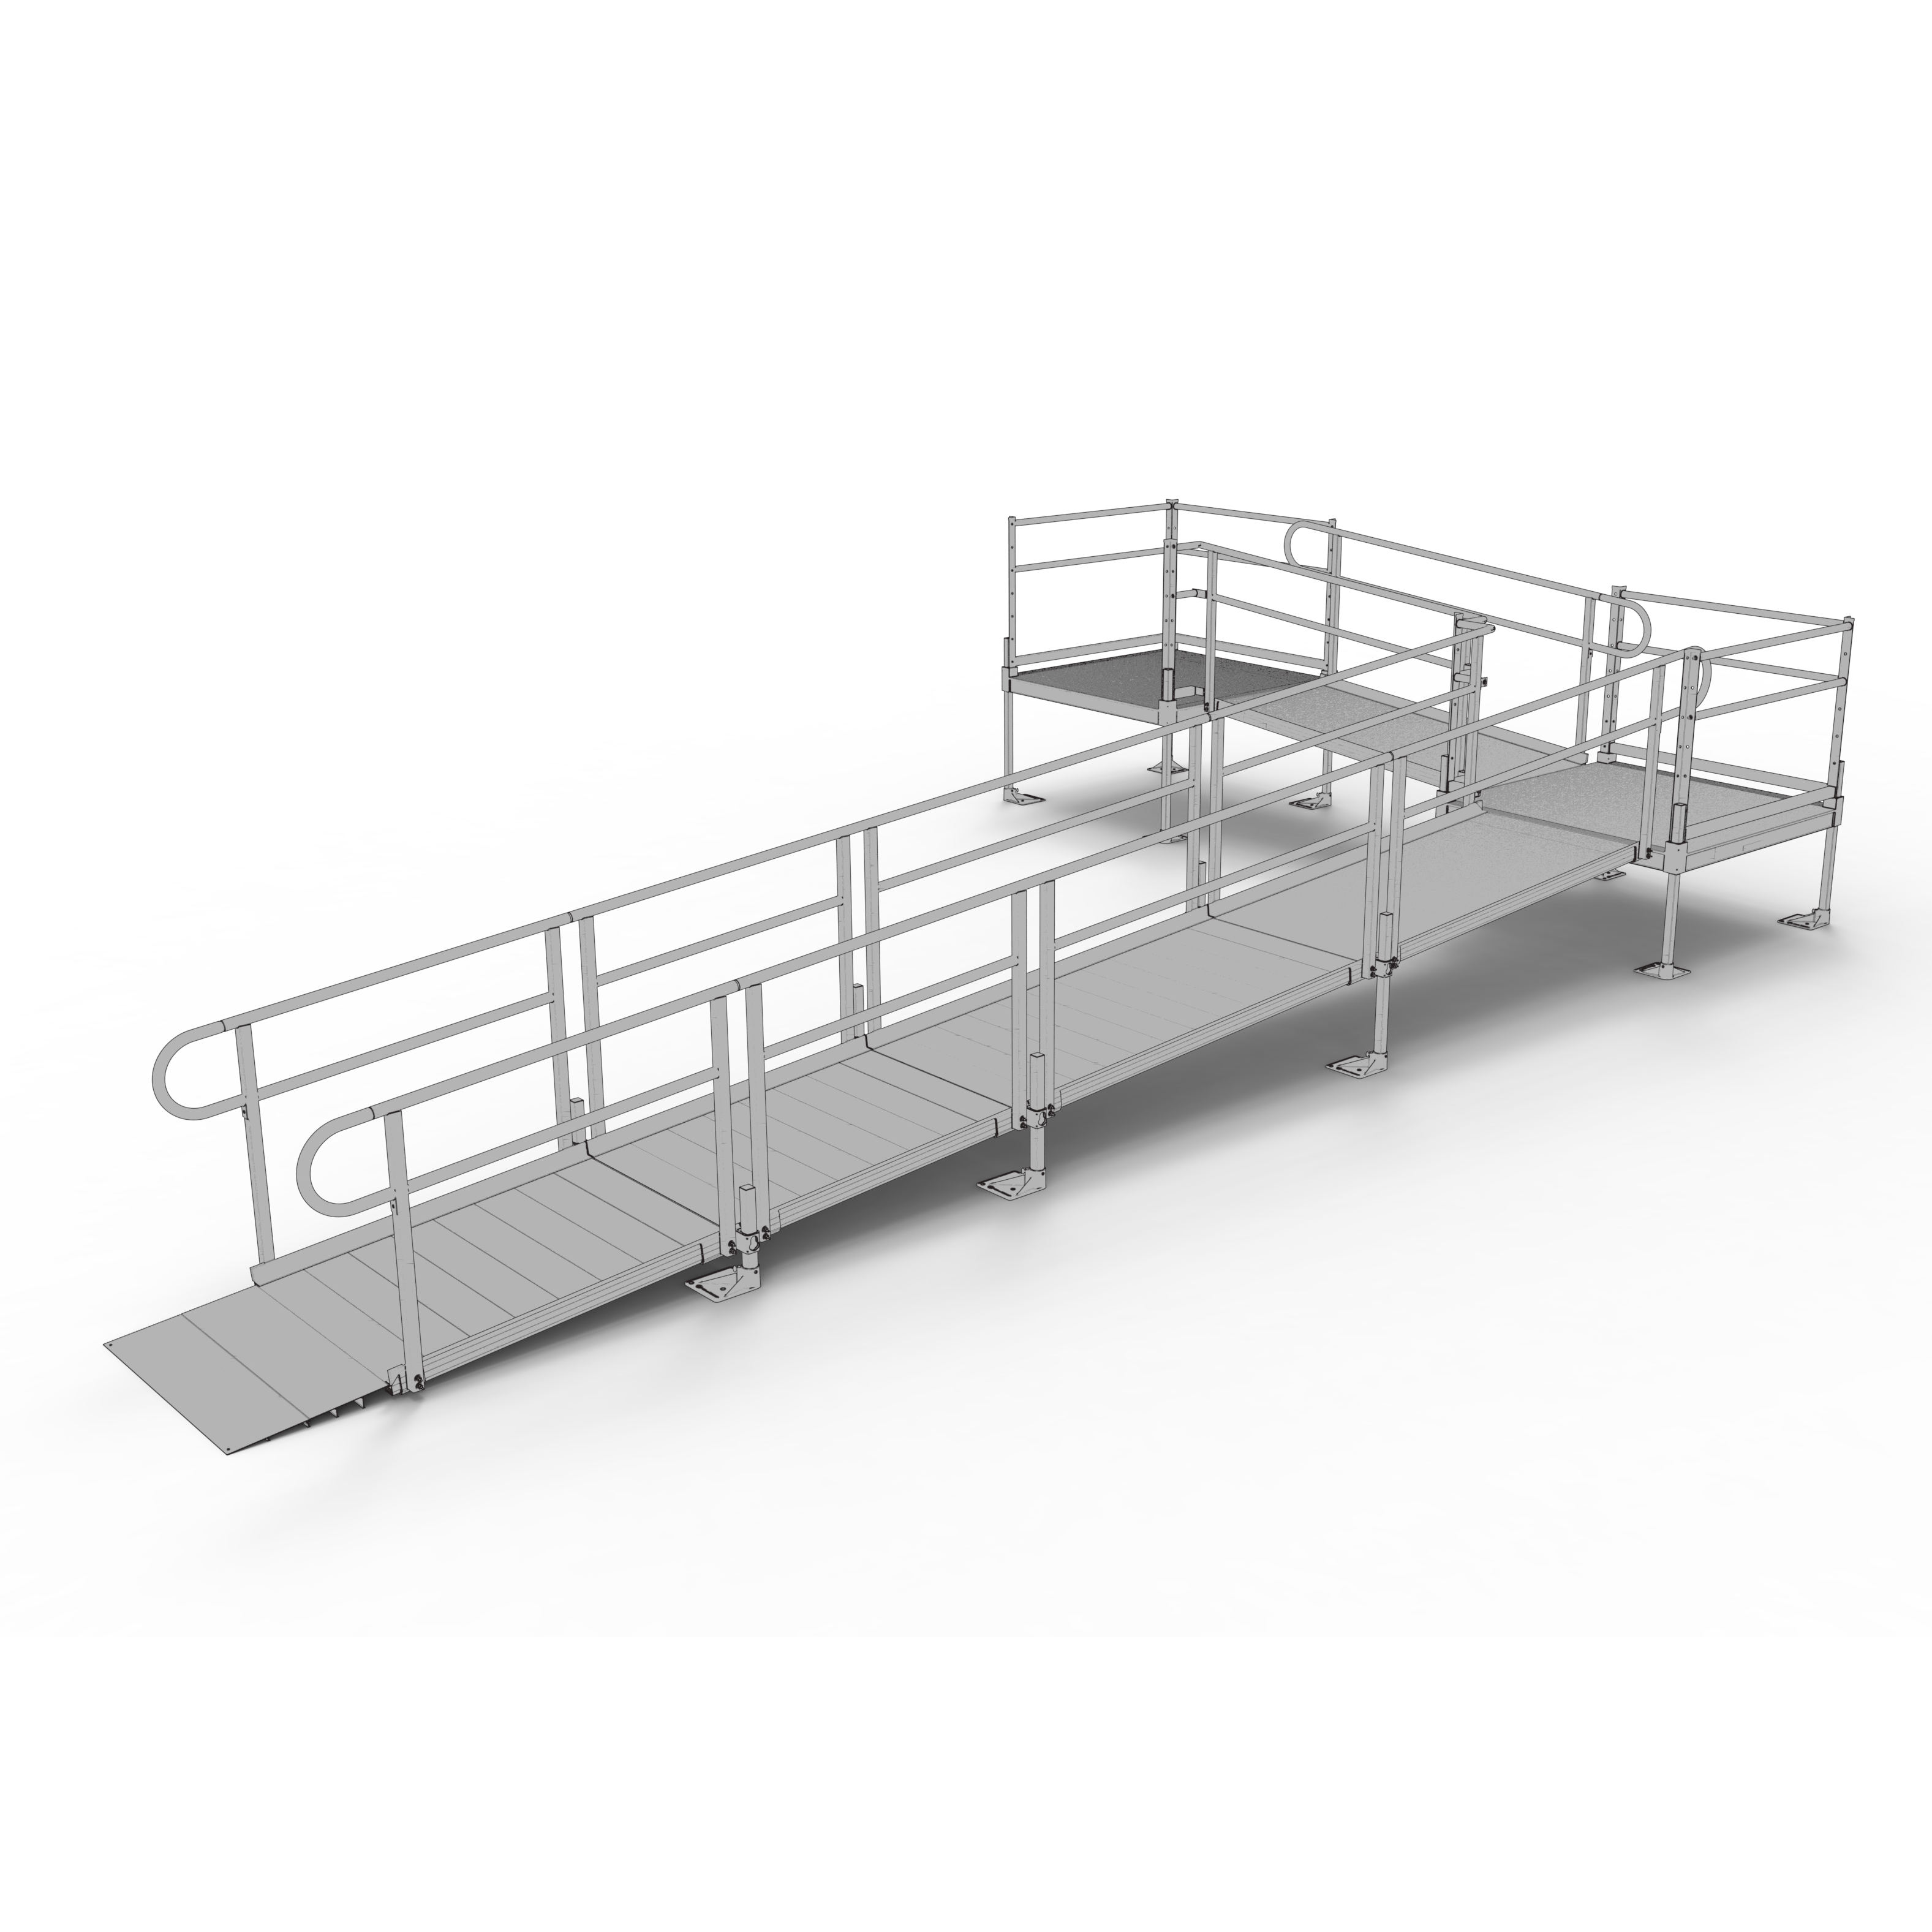 EZ-ACCESS PATHWAY® 3G Ramp Kit (L SHAPED with 4' TOP AND TURN PLATFORMS)